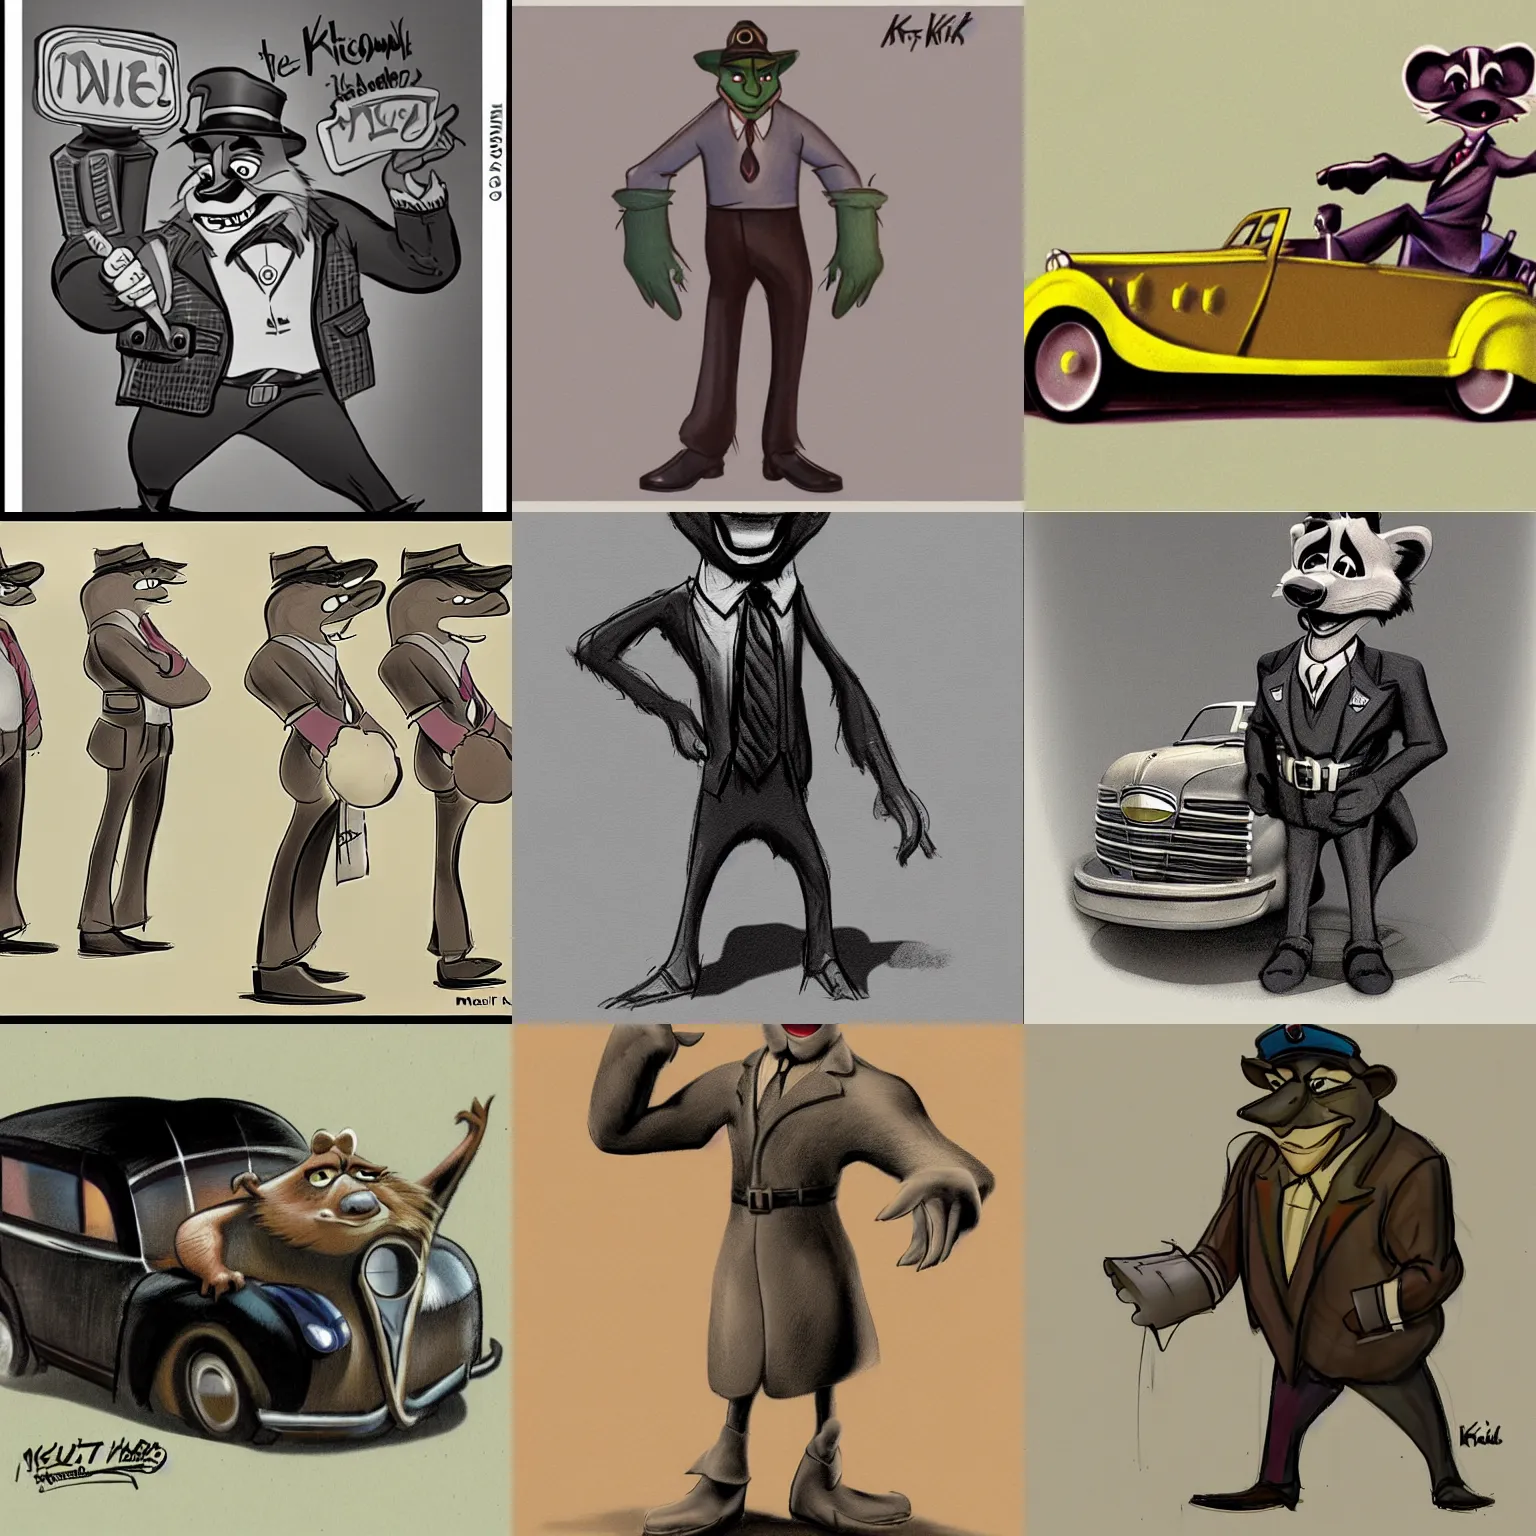 Prompt: character design concept art by Milt Kahl of a raccoon taxi driver from the 1930s 3d render